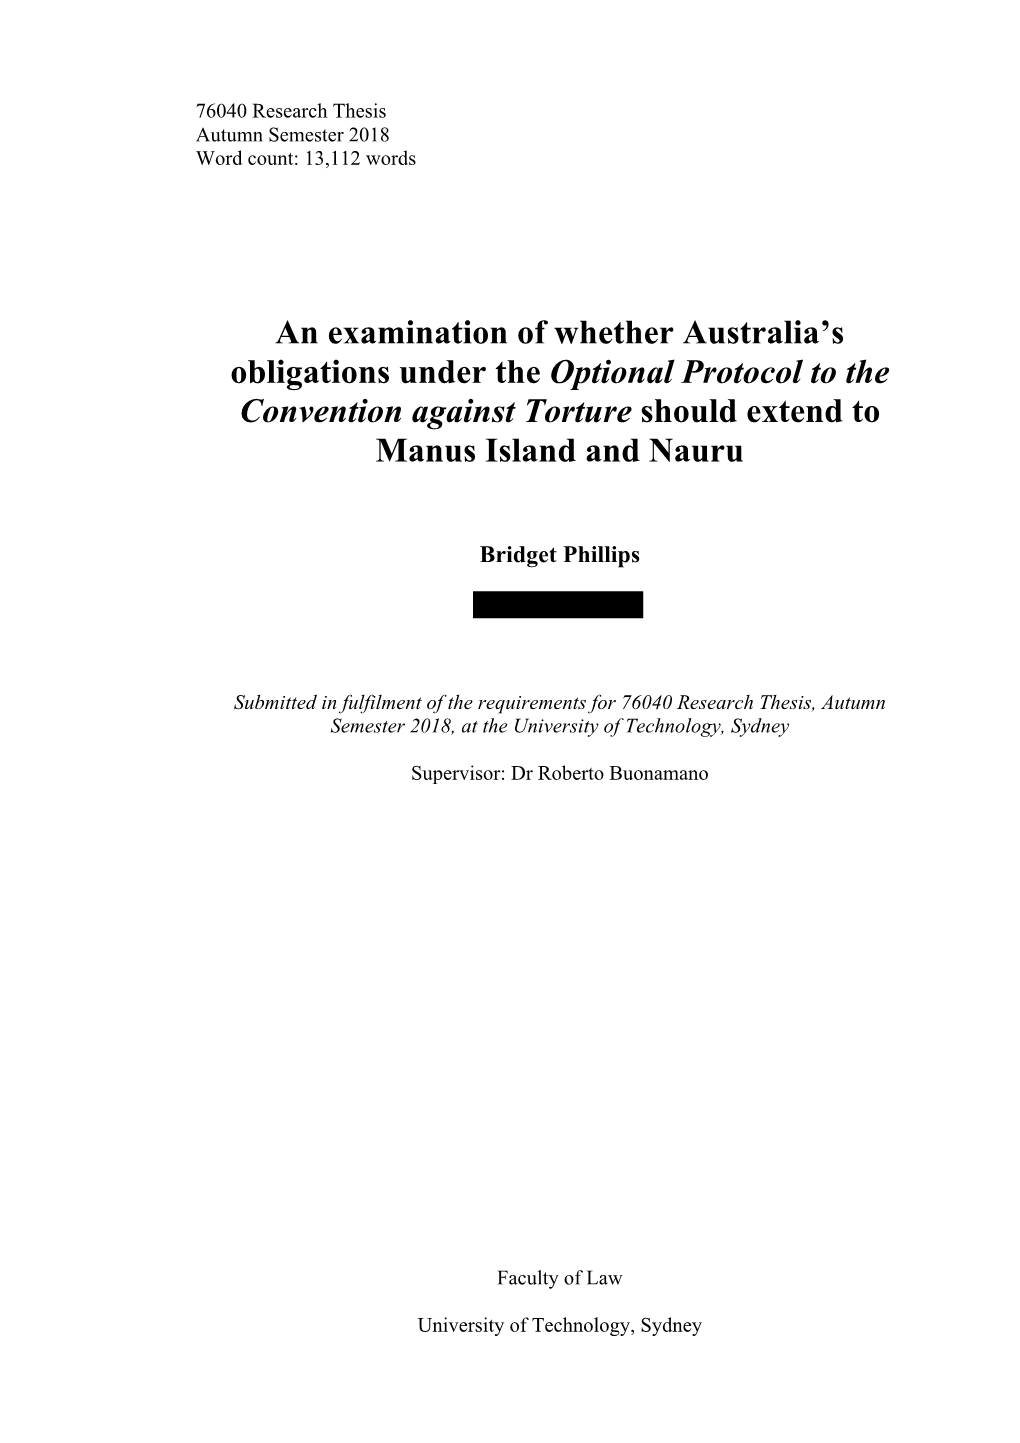 An Examination of Whether Australia's Obligations Under the Optional